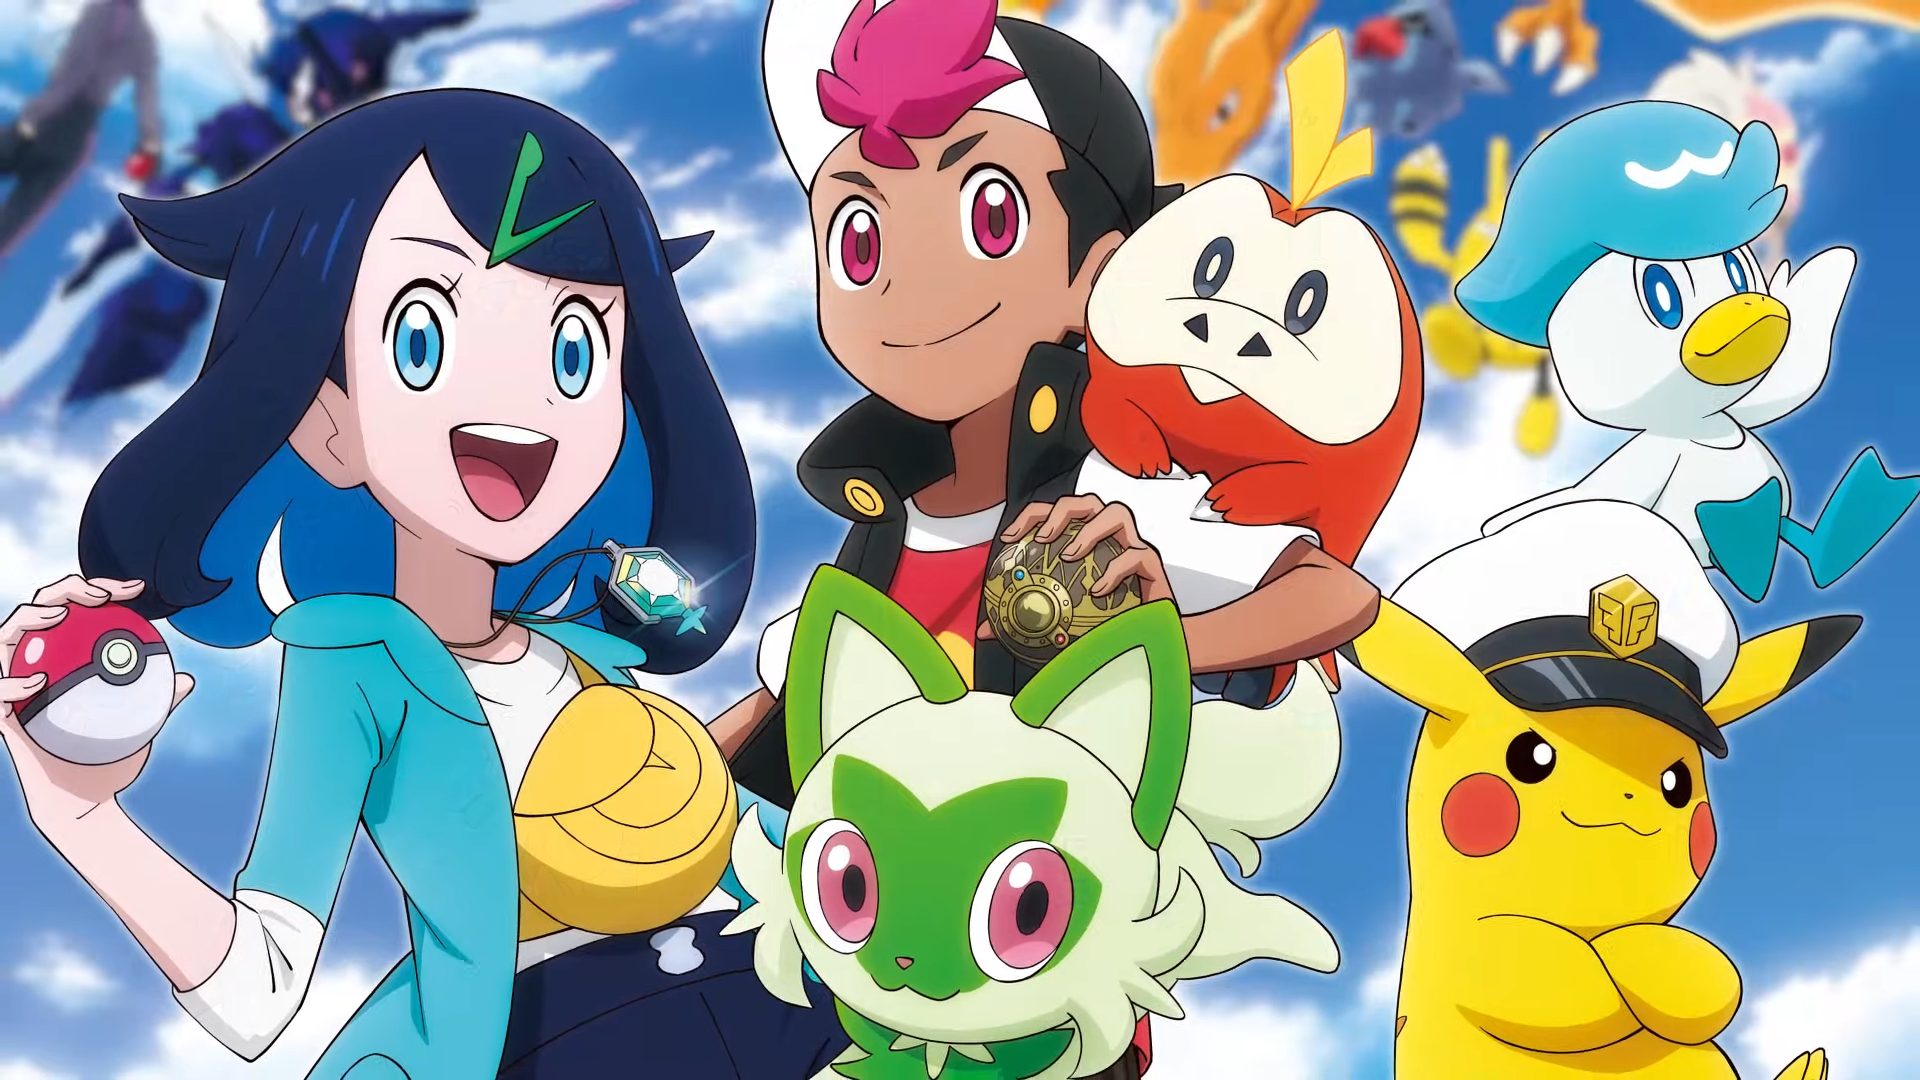 First trailer for next Pokémon anime series releases 